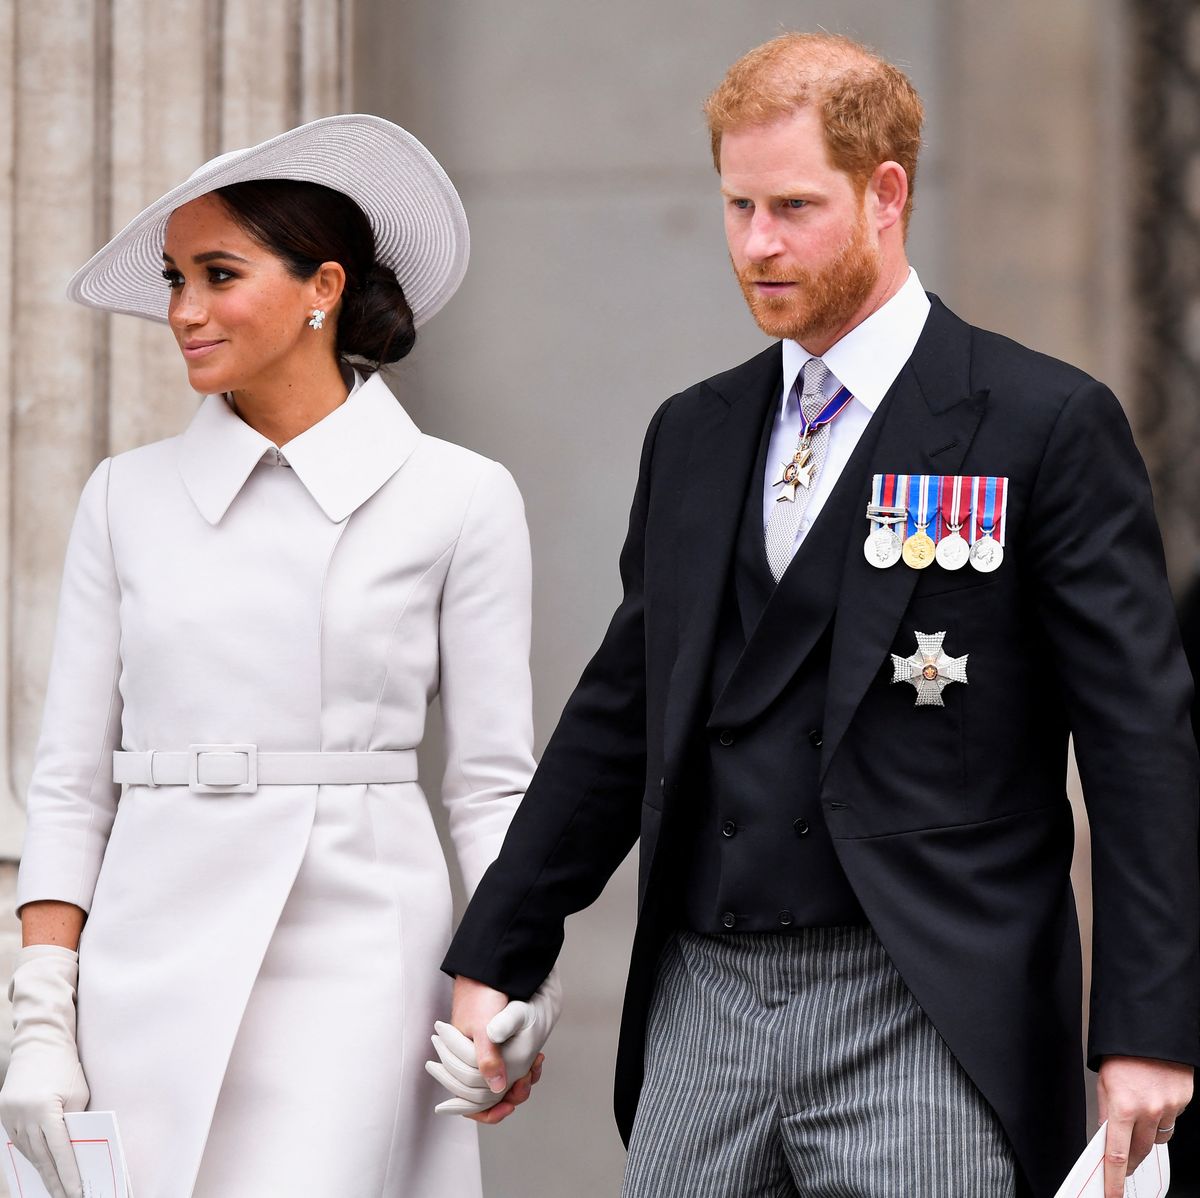 london, england june 03 prince harry, duke of sussex, and meghan, duchess of sussex after attending the national service of thanksgiving at st pauls cathedral during the queens platinum jubilee celebrations on june 3, 2022 in london, england the platinum jubilee of elizabeth ii is being celebrated from june 2 to june 5, 2022, in the uk and commonwealth to mark the 70th anniversary of the accession of queen elizabeth ii on 6 february 1952 photo by toby melville wpa poolgetty images